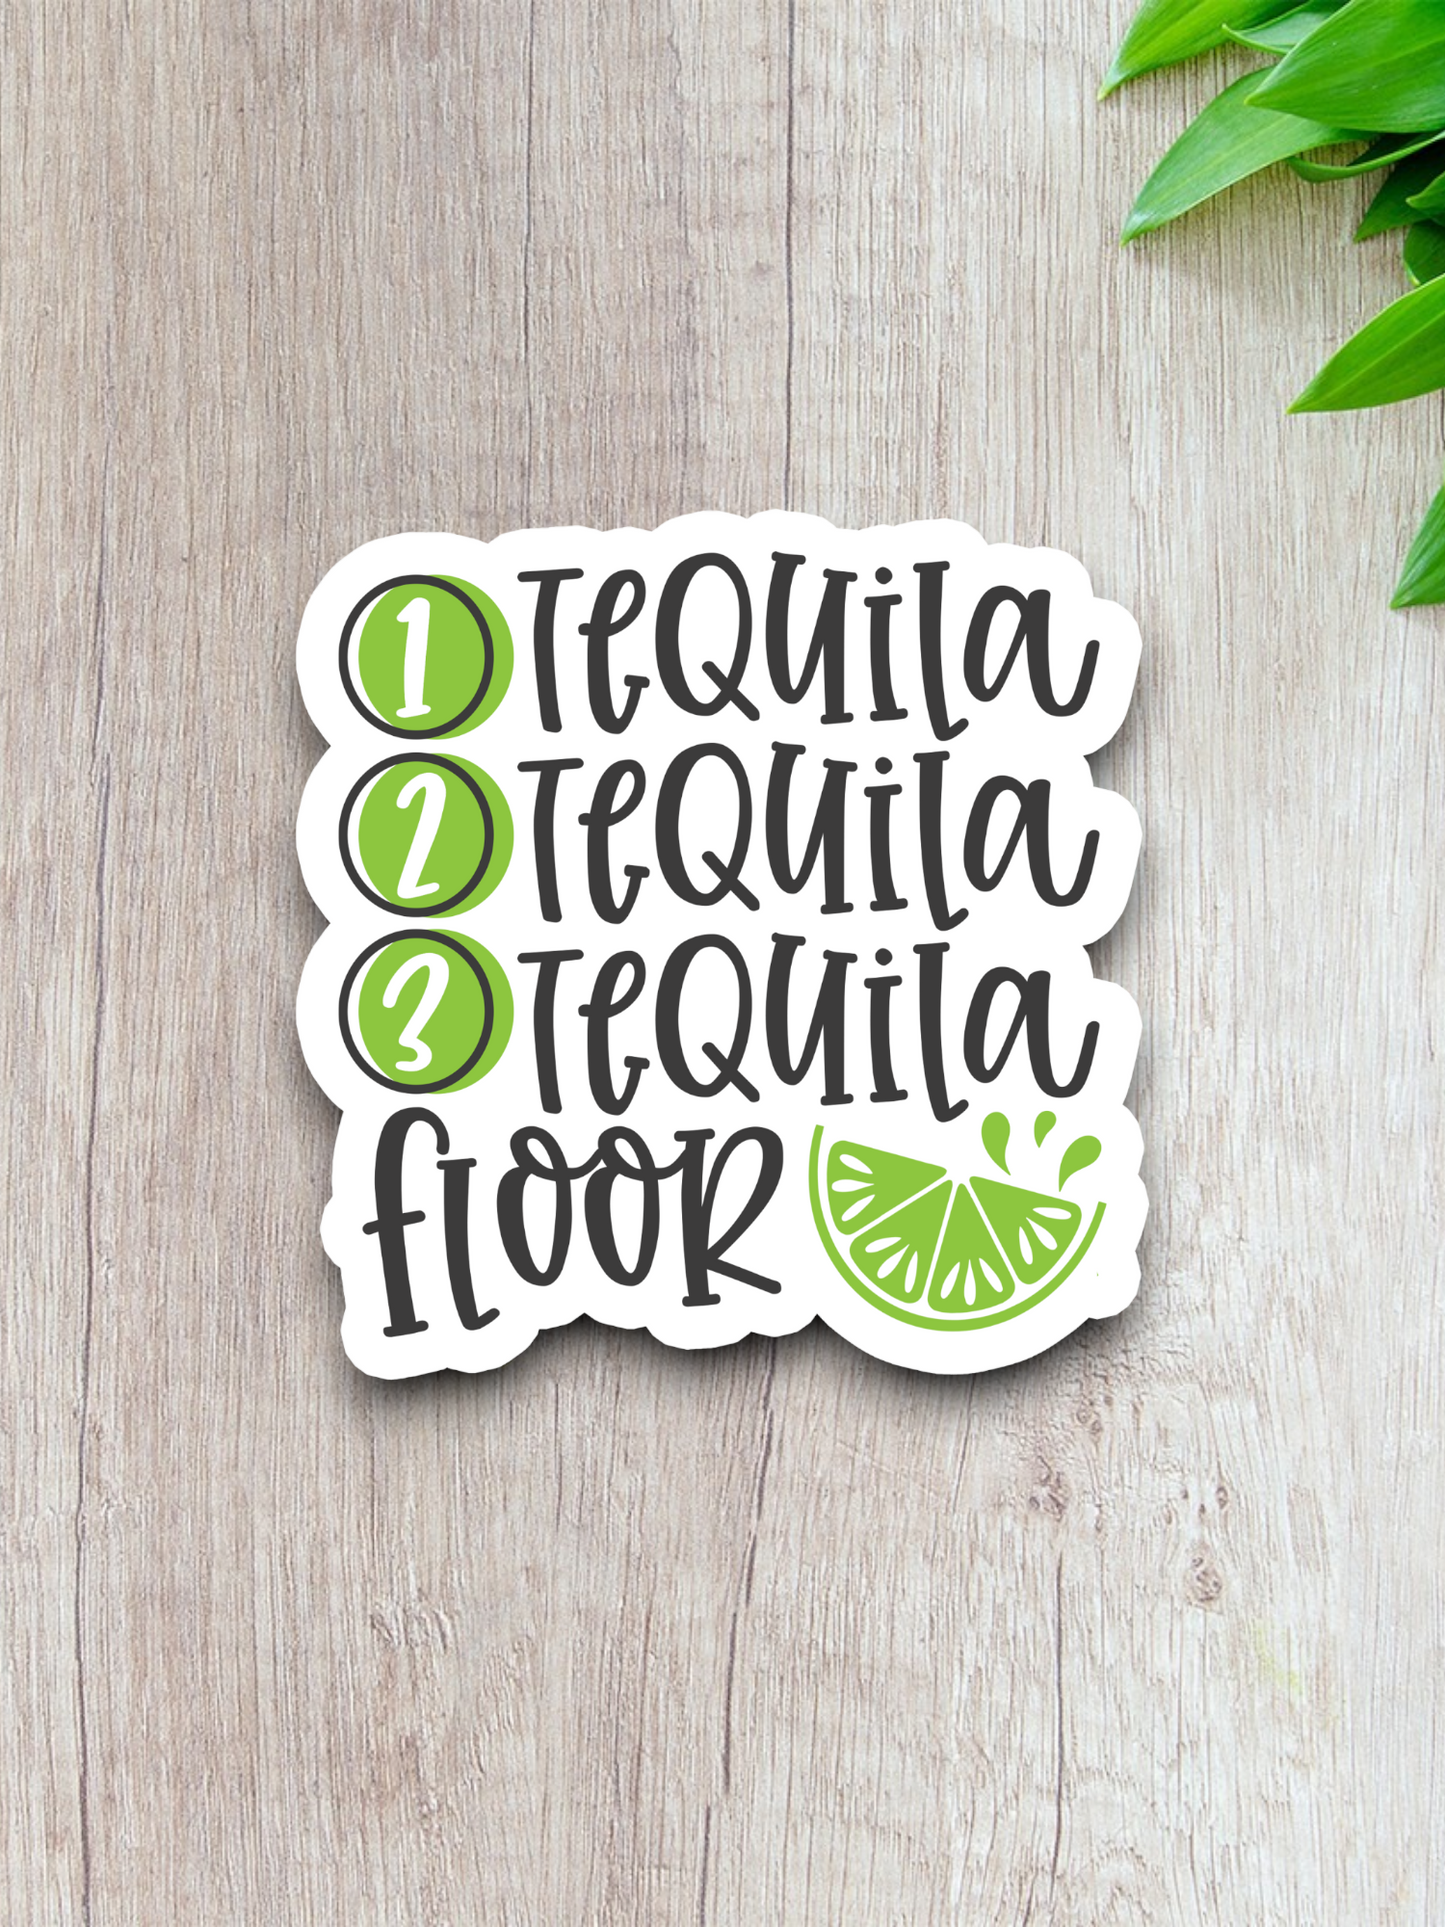 One Tequila Two Tequila Three Tequila Floor Drinking Sticker